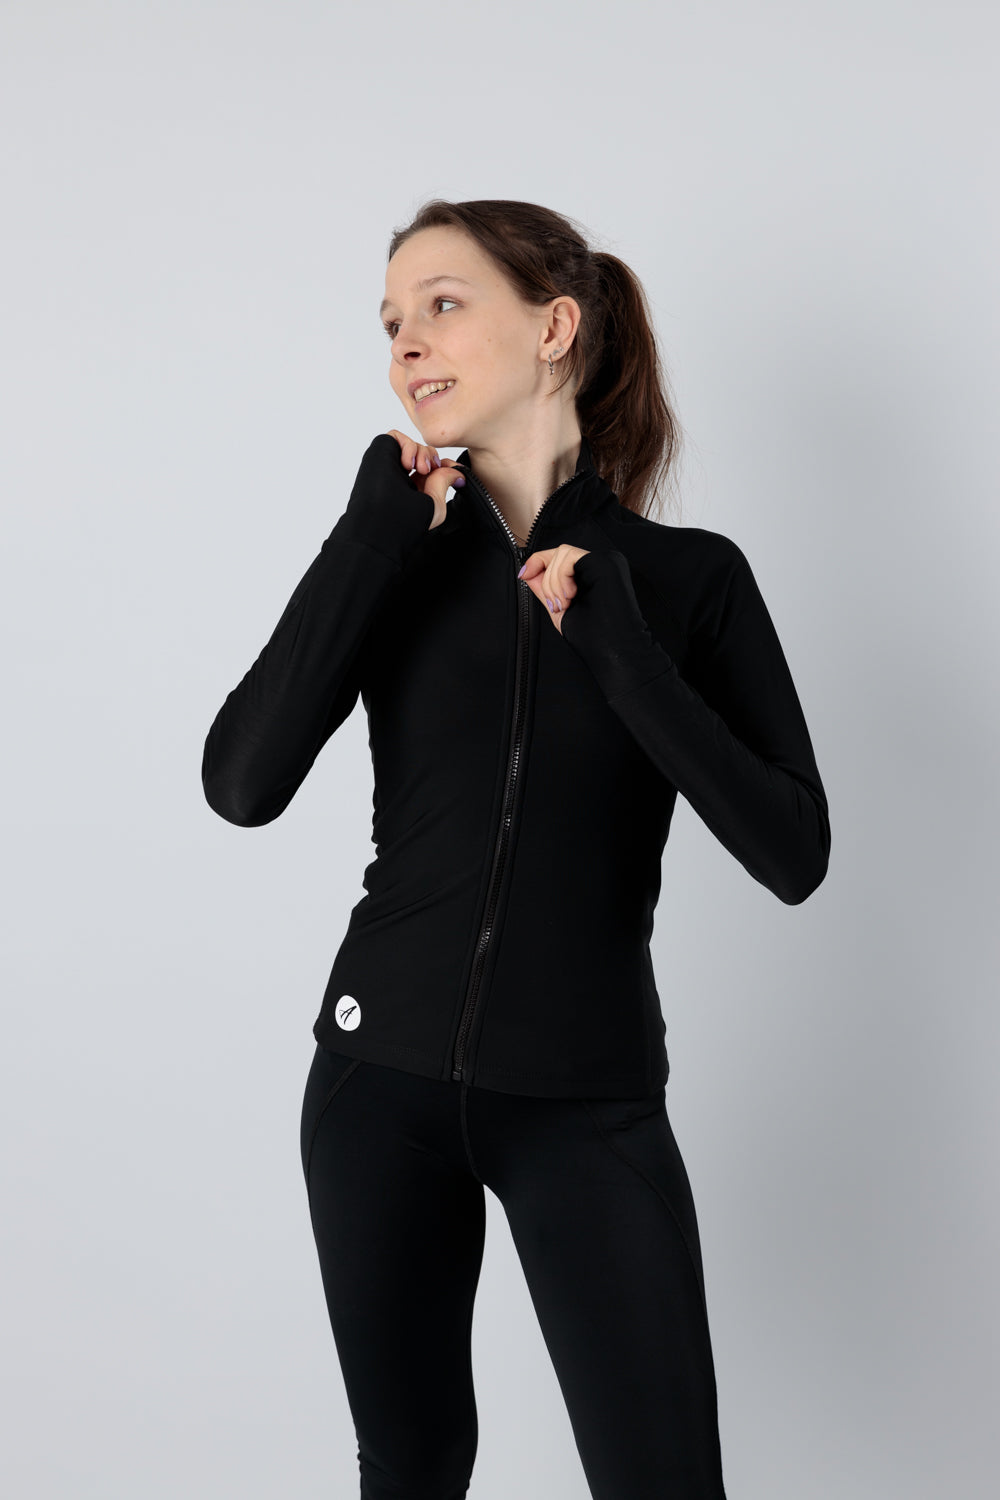 Icessentials Thermal Warm-Up Jacket